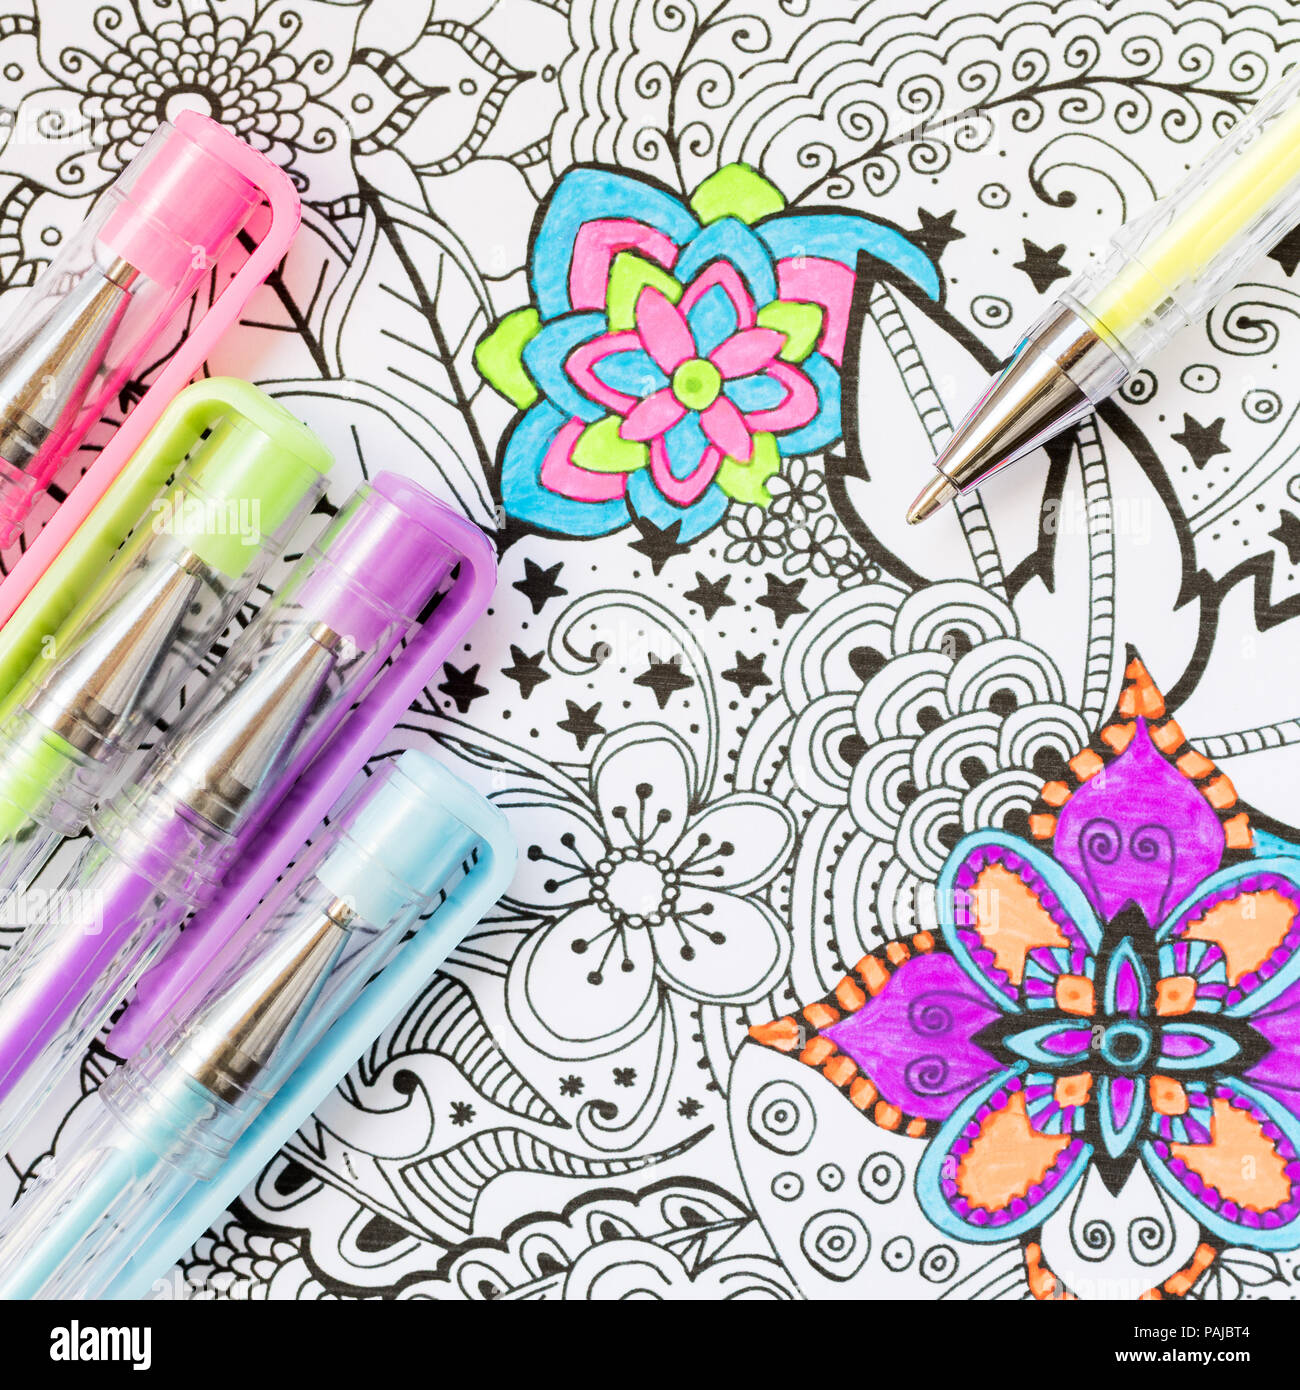 https://c8.alamy.com/comp/PAJBT4/adult-coloring-book-new-stress-relieving-trend-art-therapy-mental-health-creativity-and-mindfulness-concept-adult-coloring-page-with-pastel-color-PAJBT4.jpg